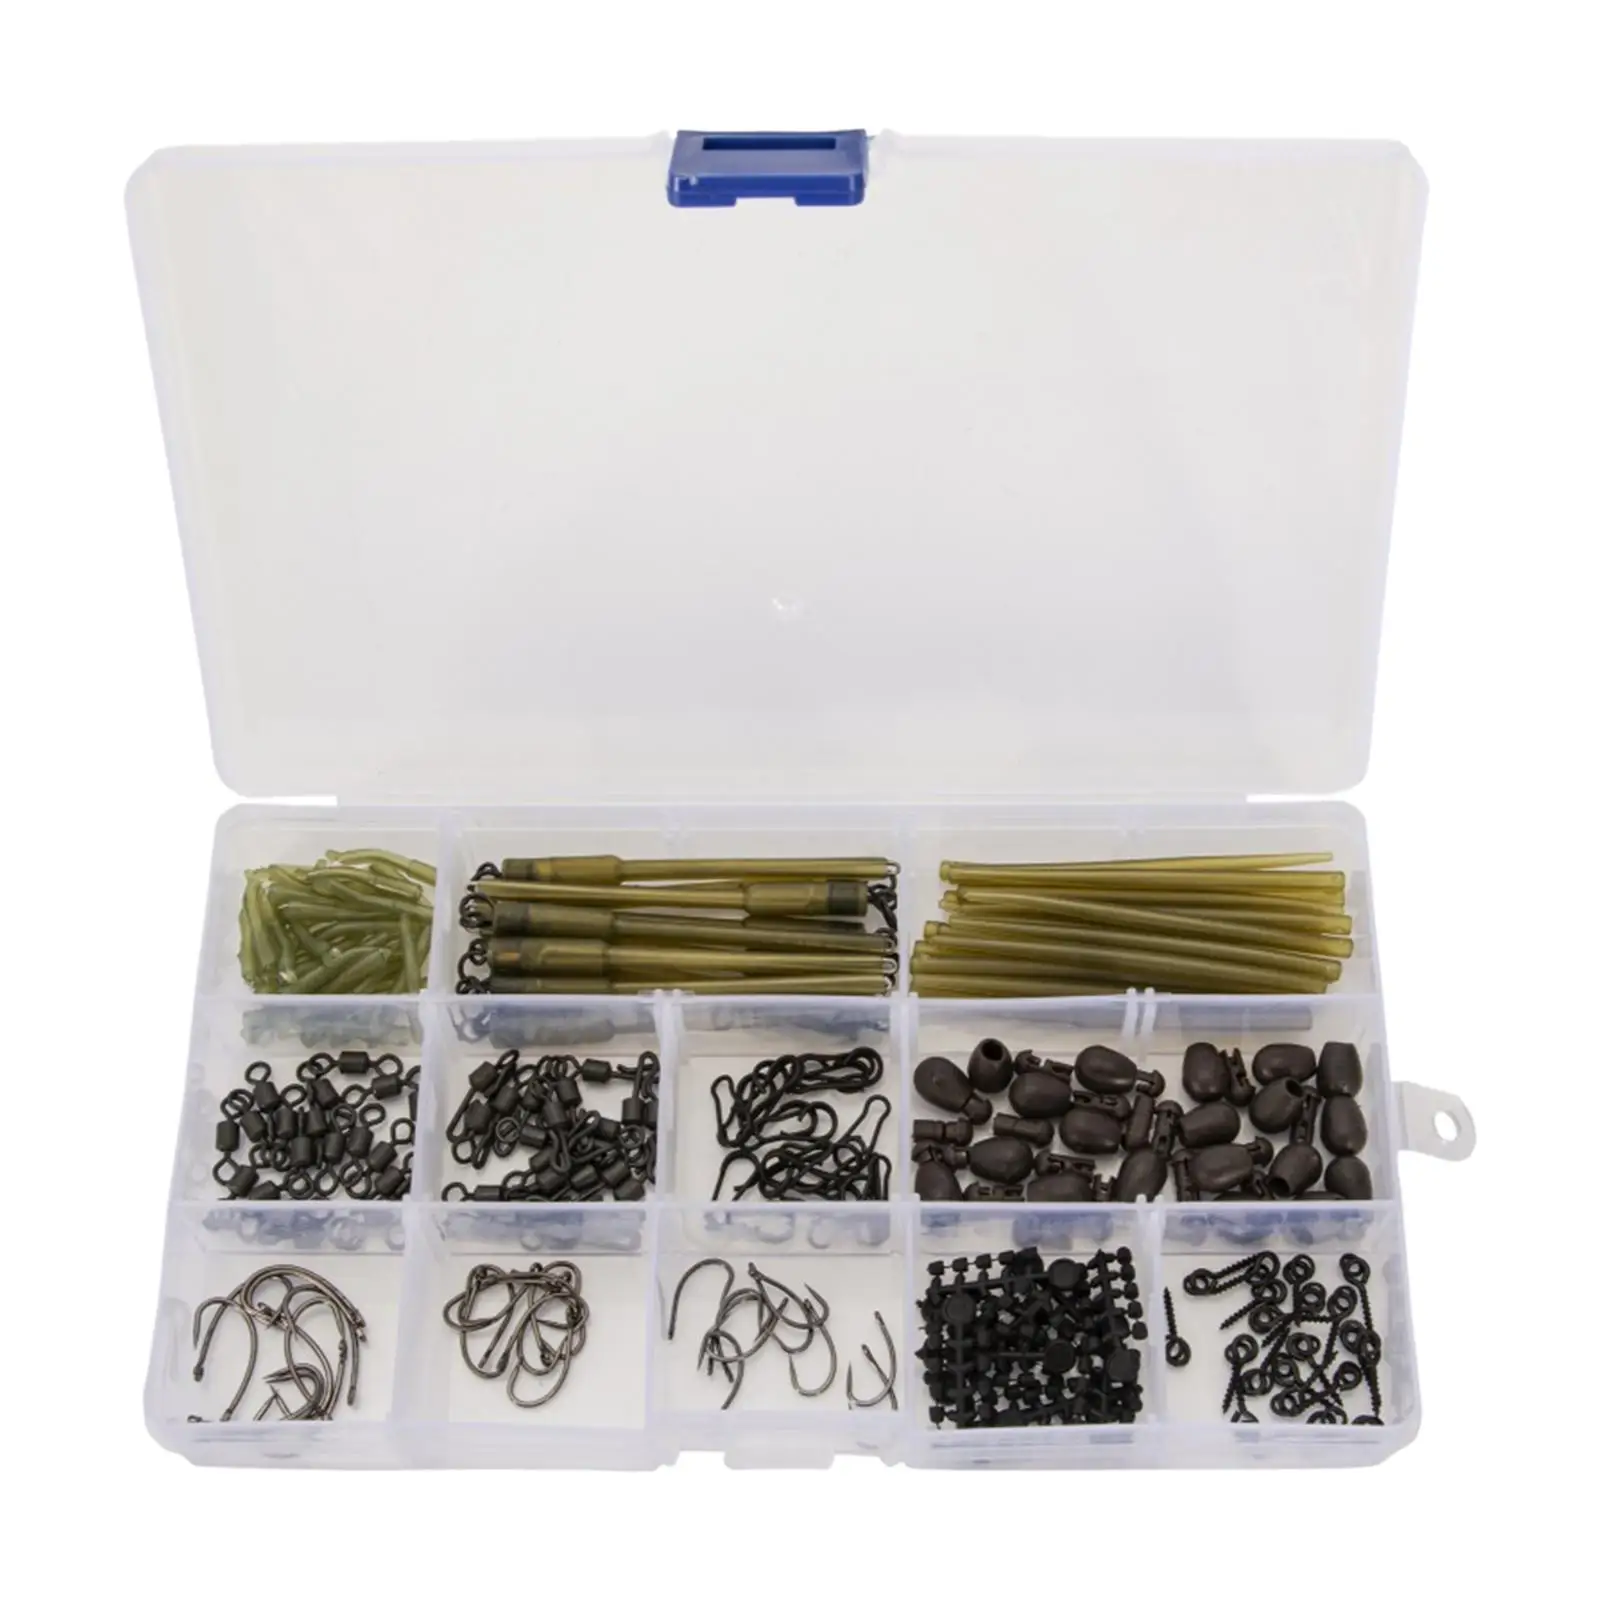 Carp Fishing Accessories W/ Portable Case - Quick Change Swivel, Carp Hooks, Tail Rubber Sleeves Tackle Box Kit